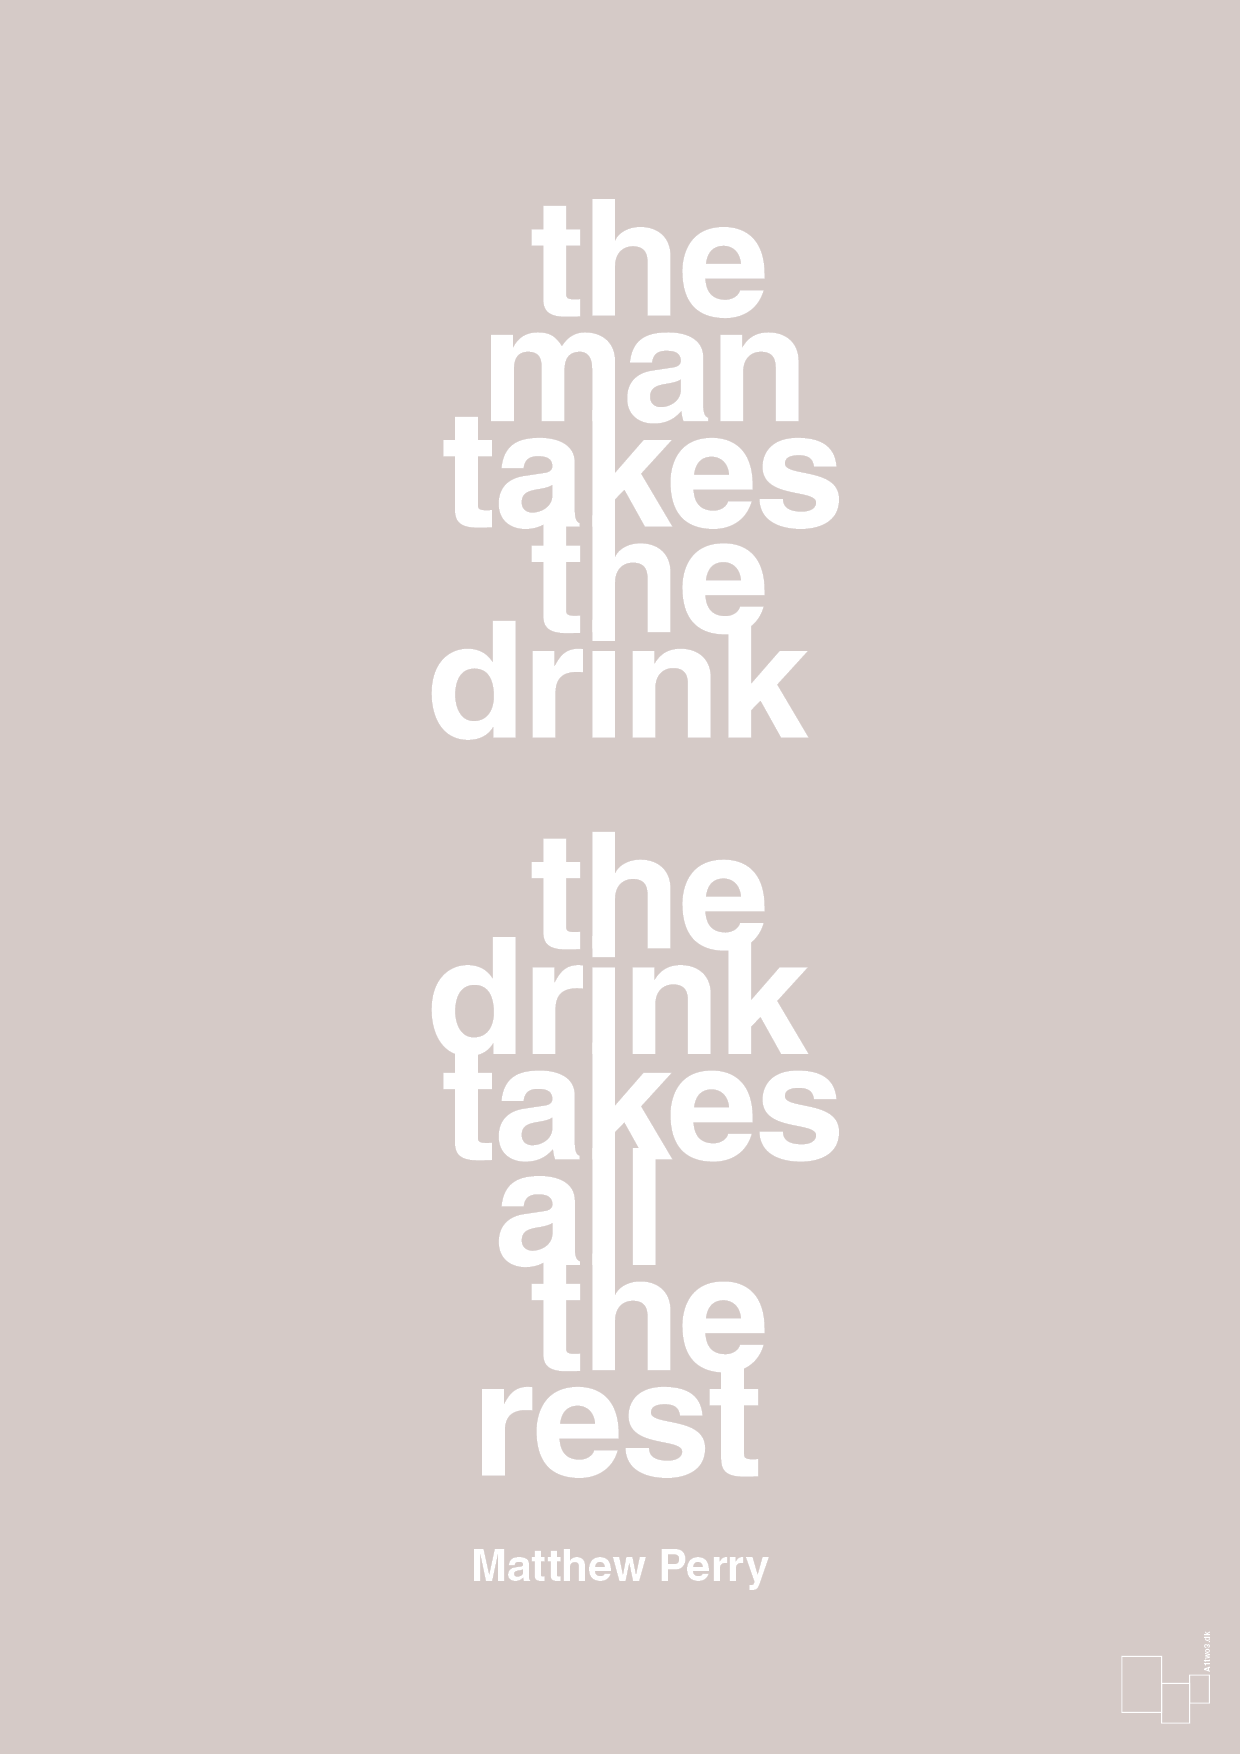 the man takes the drink the drink takes all the rest - Plakat med Citater i Broken Beige